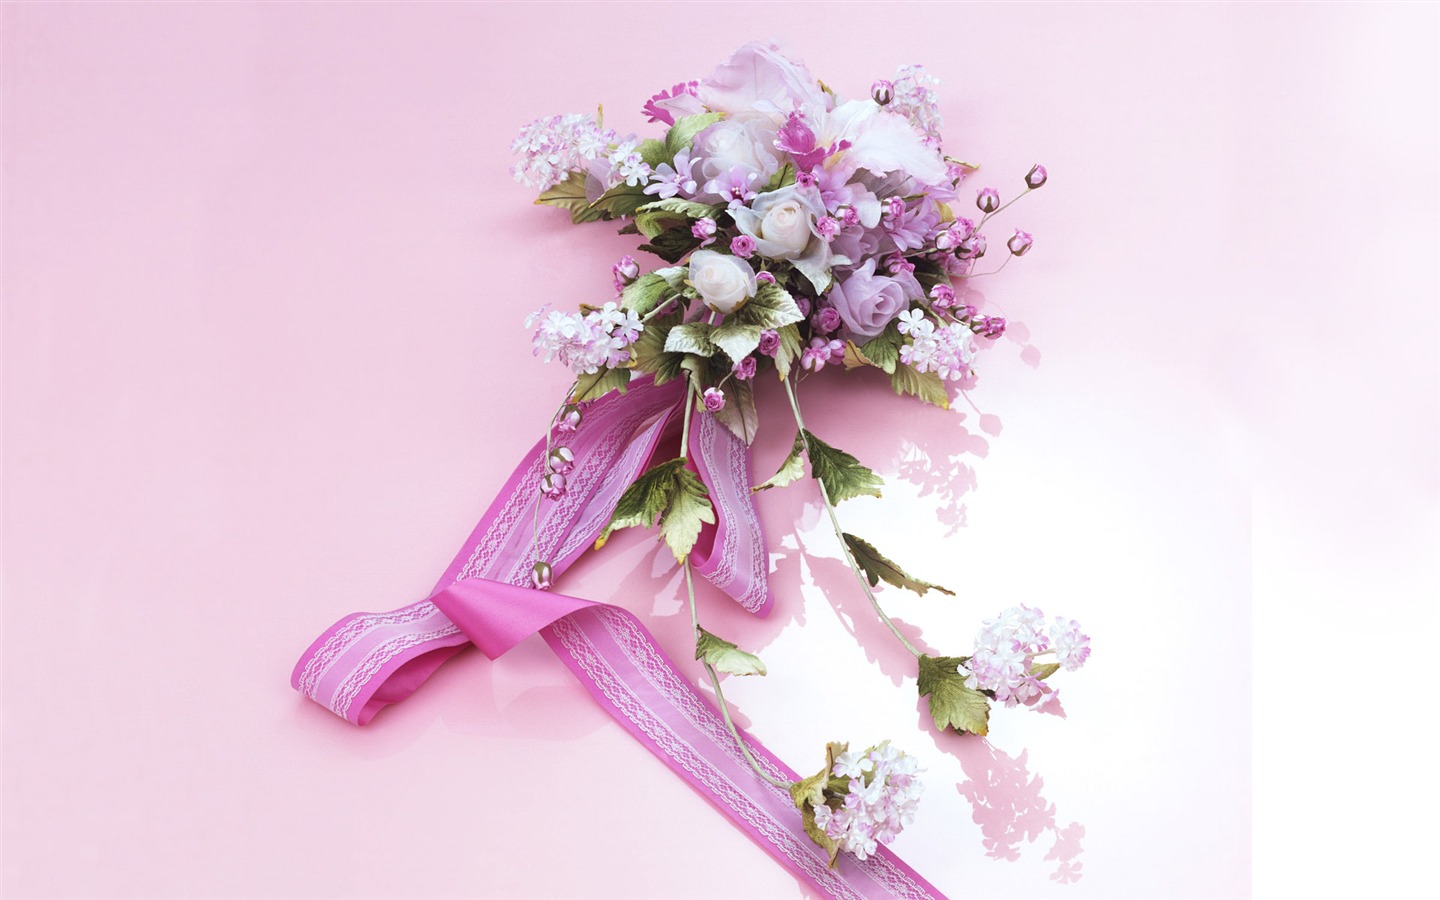 Wedding Flowers items wallpapers (2) #7 - 1440x900